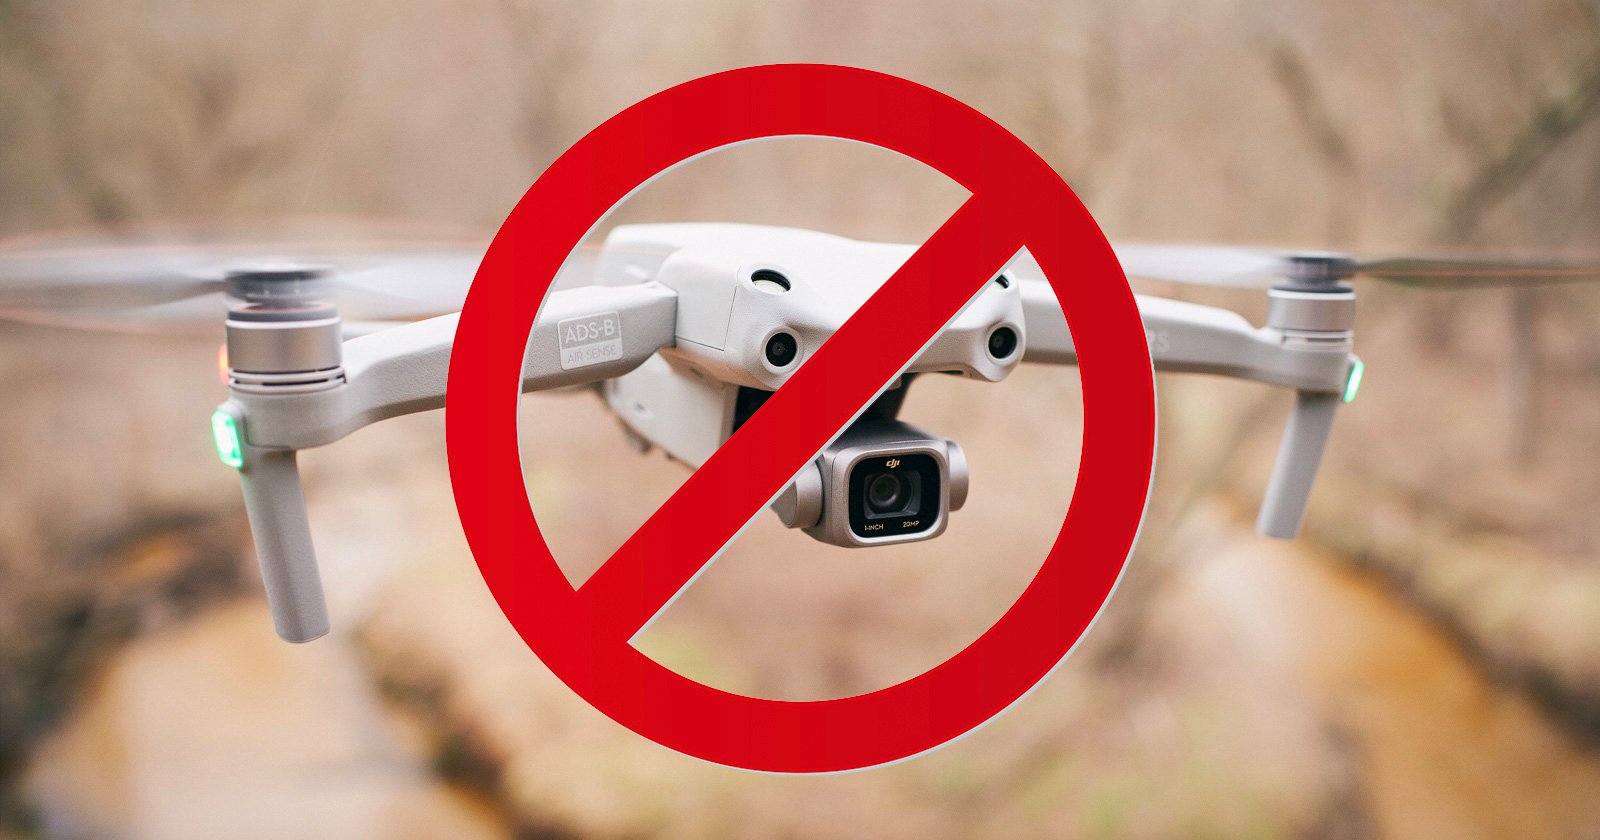 Top FCC Official Calls For Ban of DJI Drones, Citing National Security